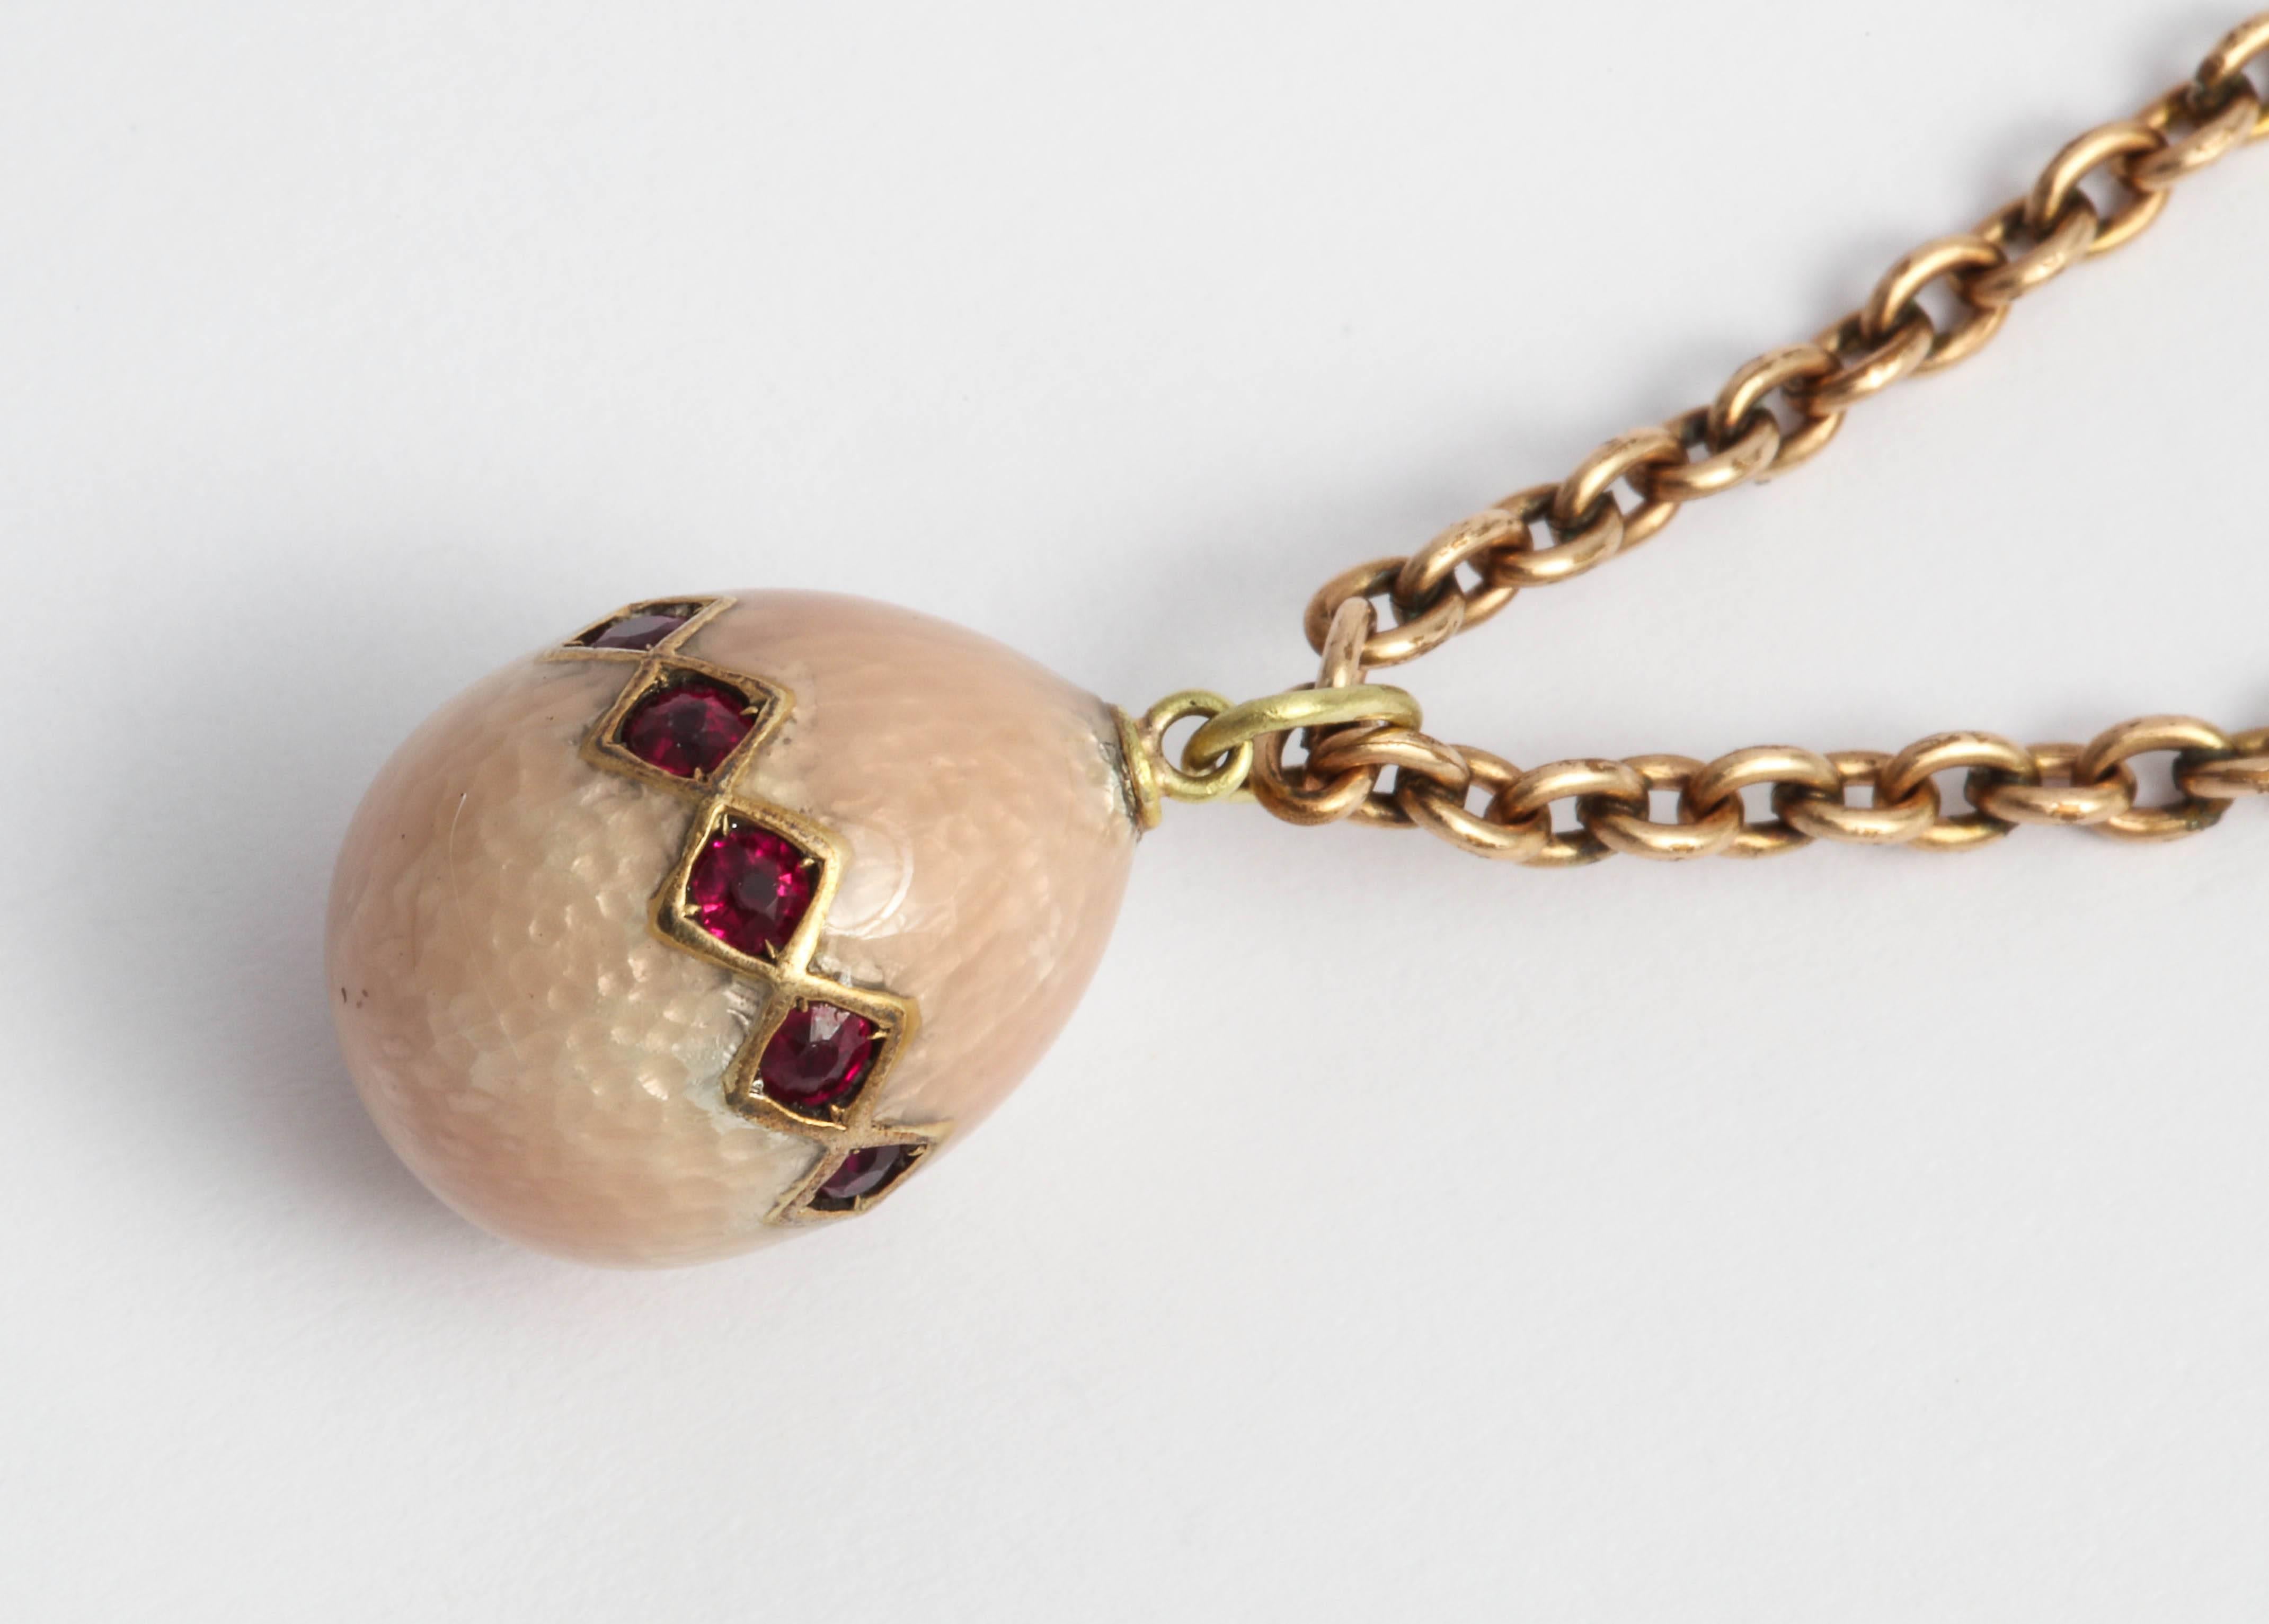 Russian Empire Russian Imperial-era Enameled and Ruby Egg Pendant, circa 1900